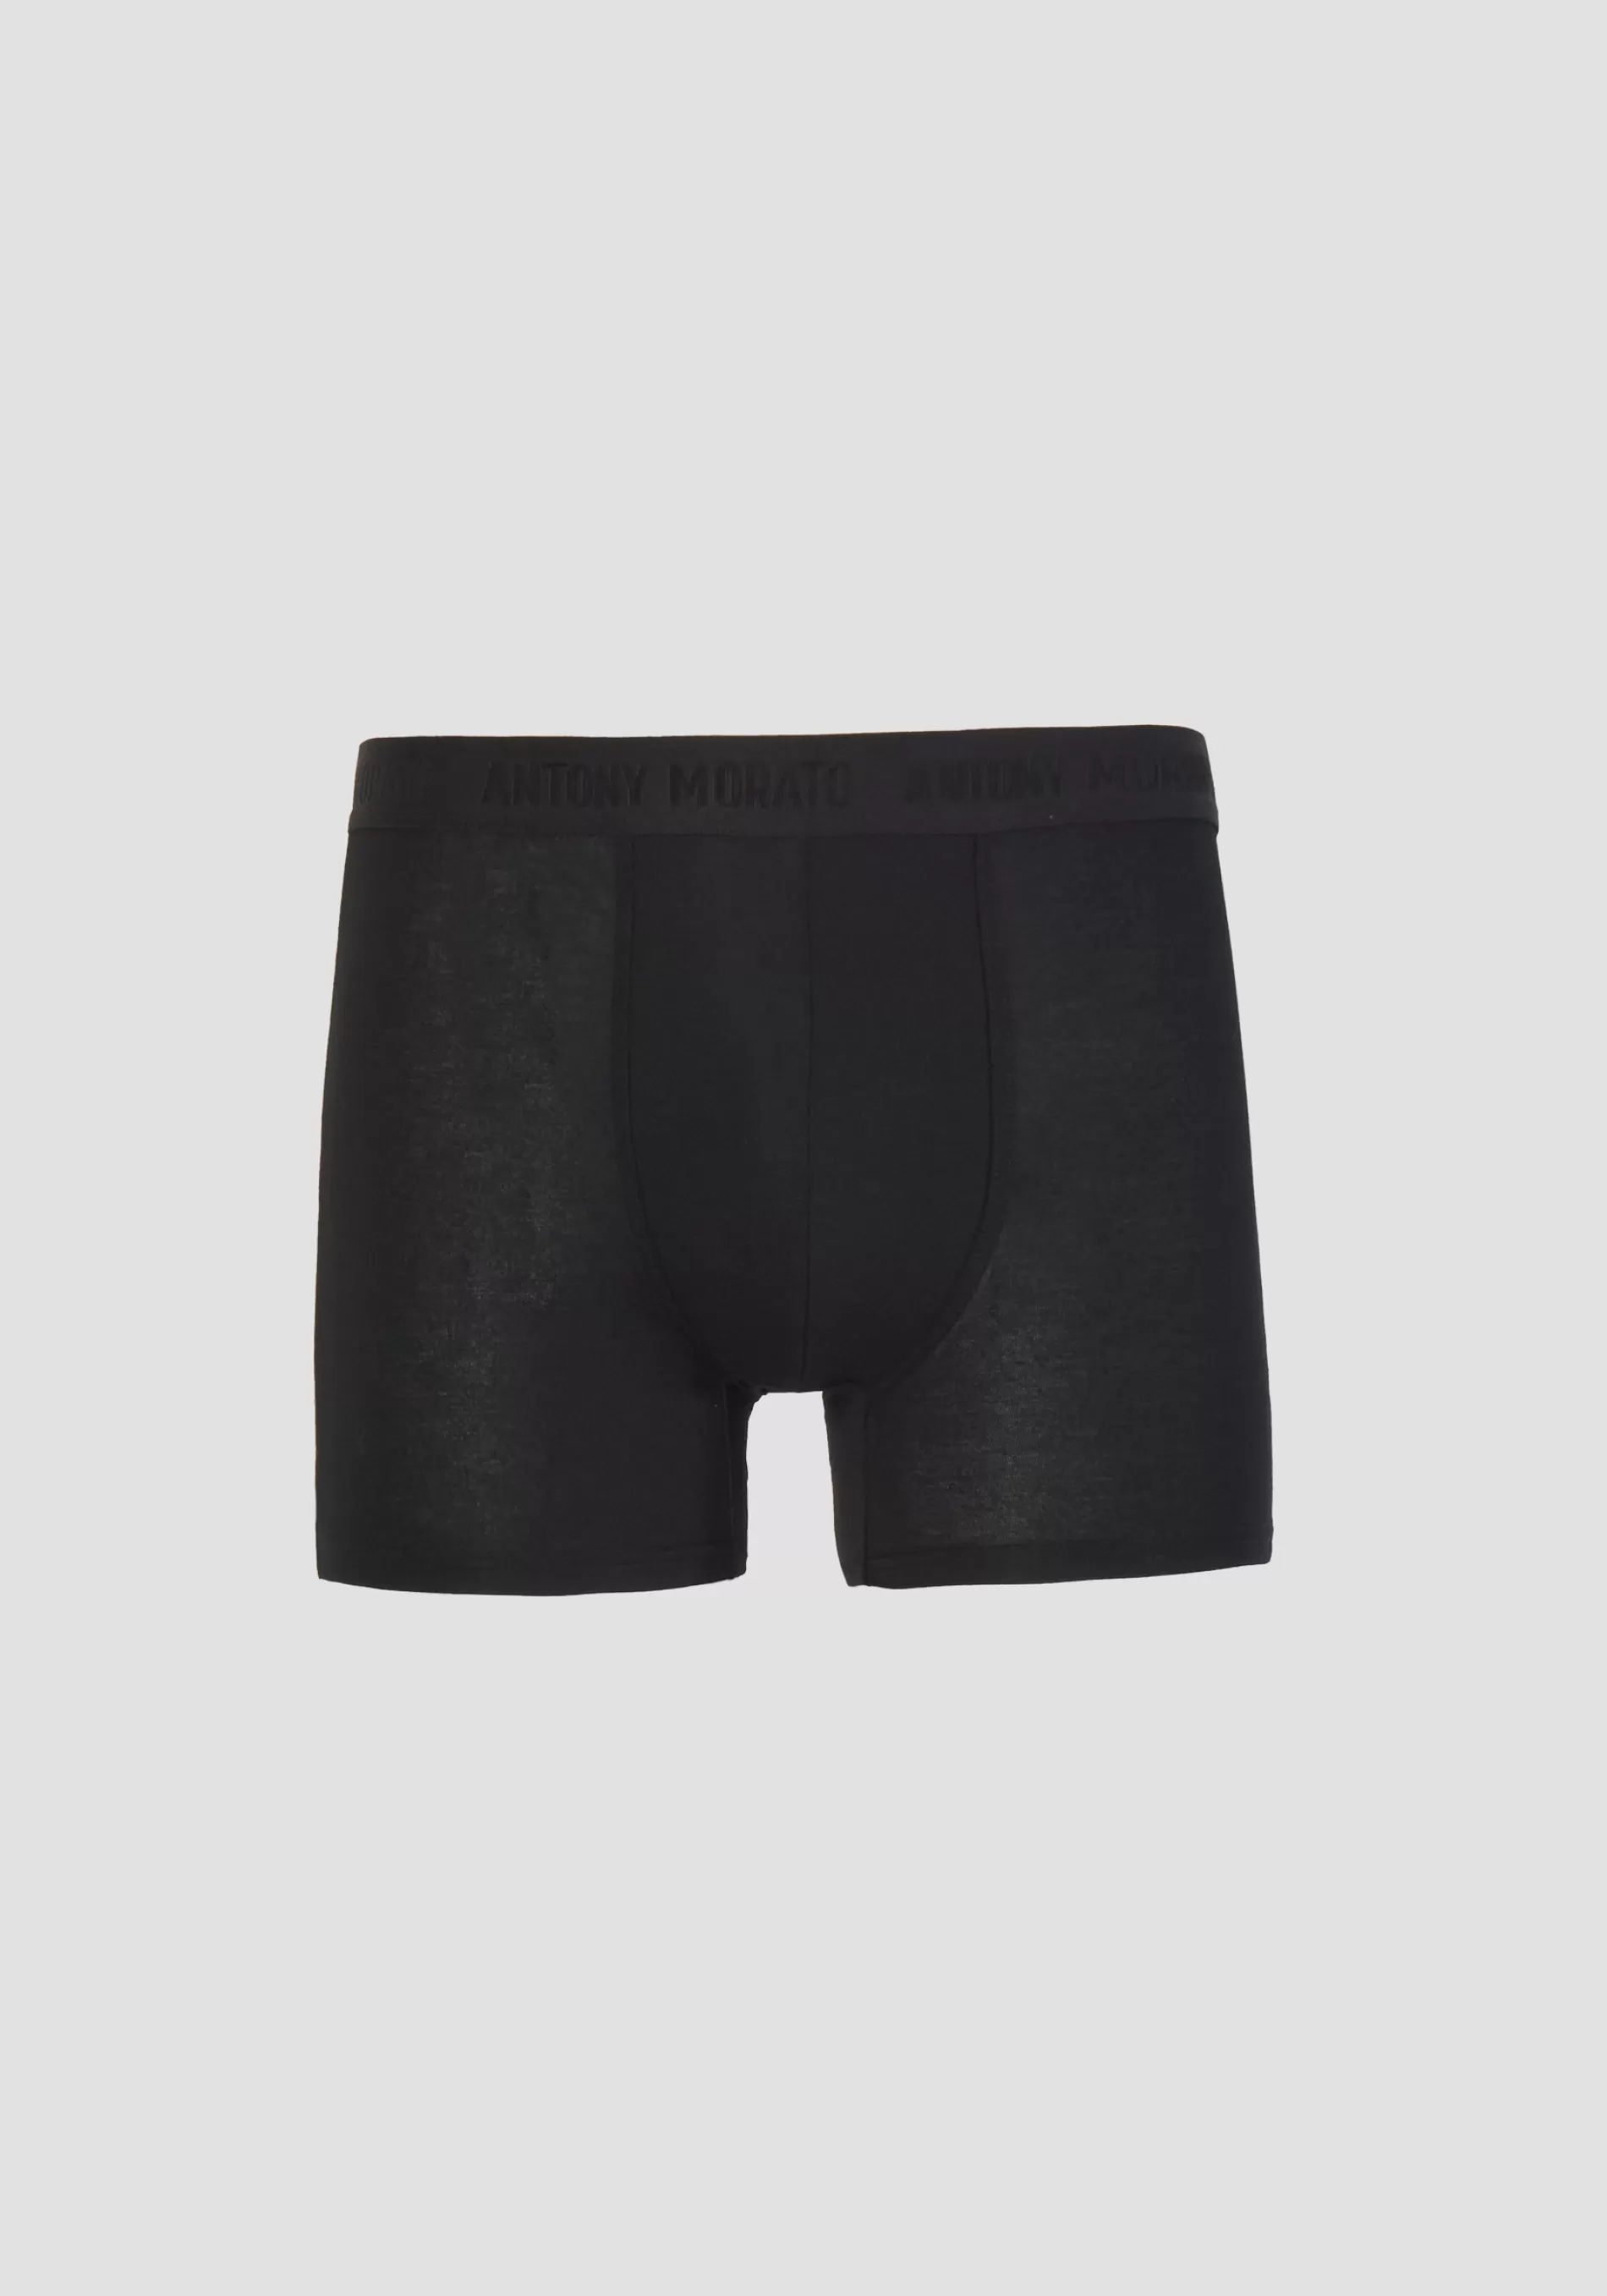 Flash Sale NATURAL FIBRE BOXERS WITH ELASTIC WAISTBAND Underwear